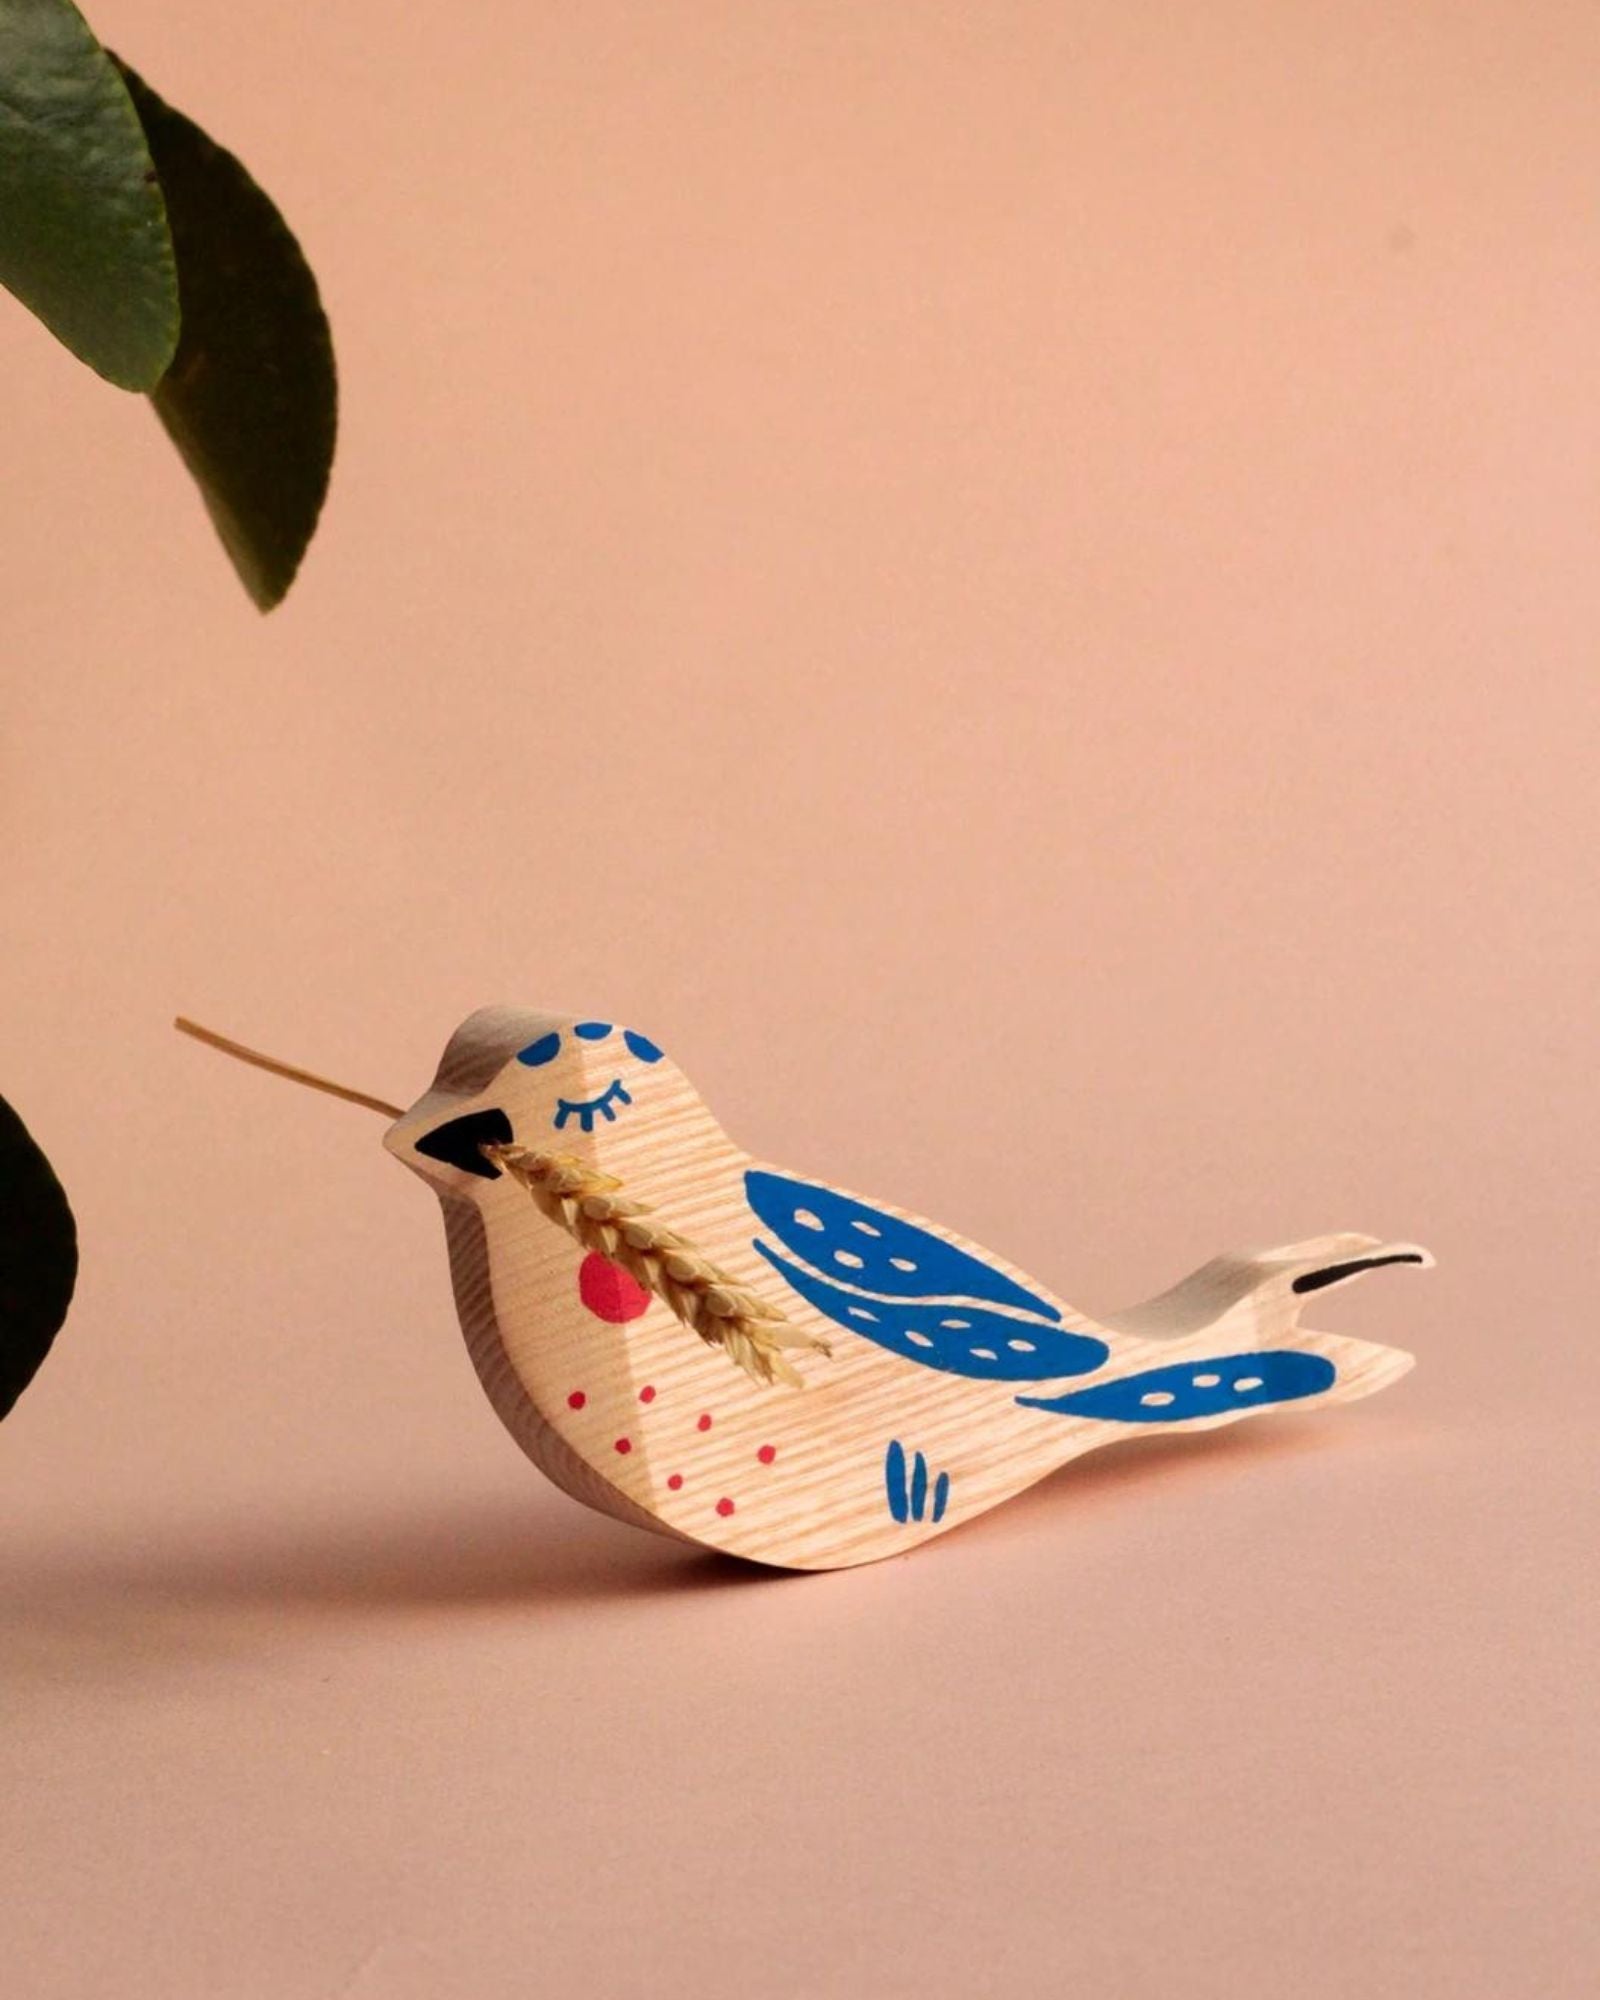 Exquisite French ash bird sculpture, hand-painted